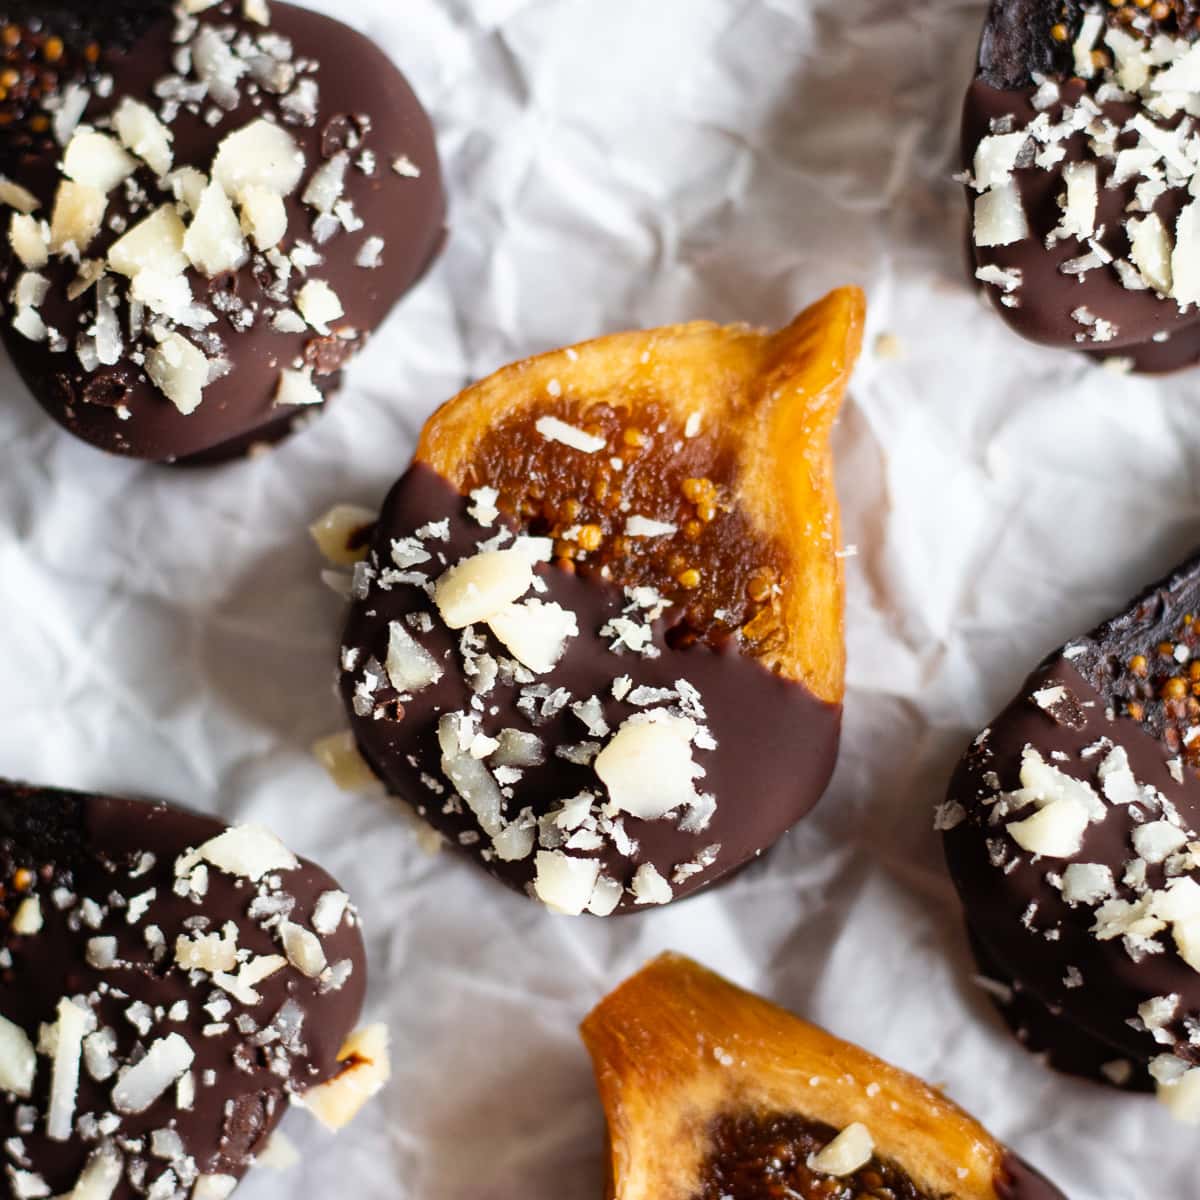 komponent møl adelig Low FODMAP Chocolate-Dipped Figs - Fun Without FODMAPs